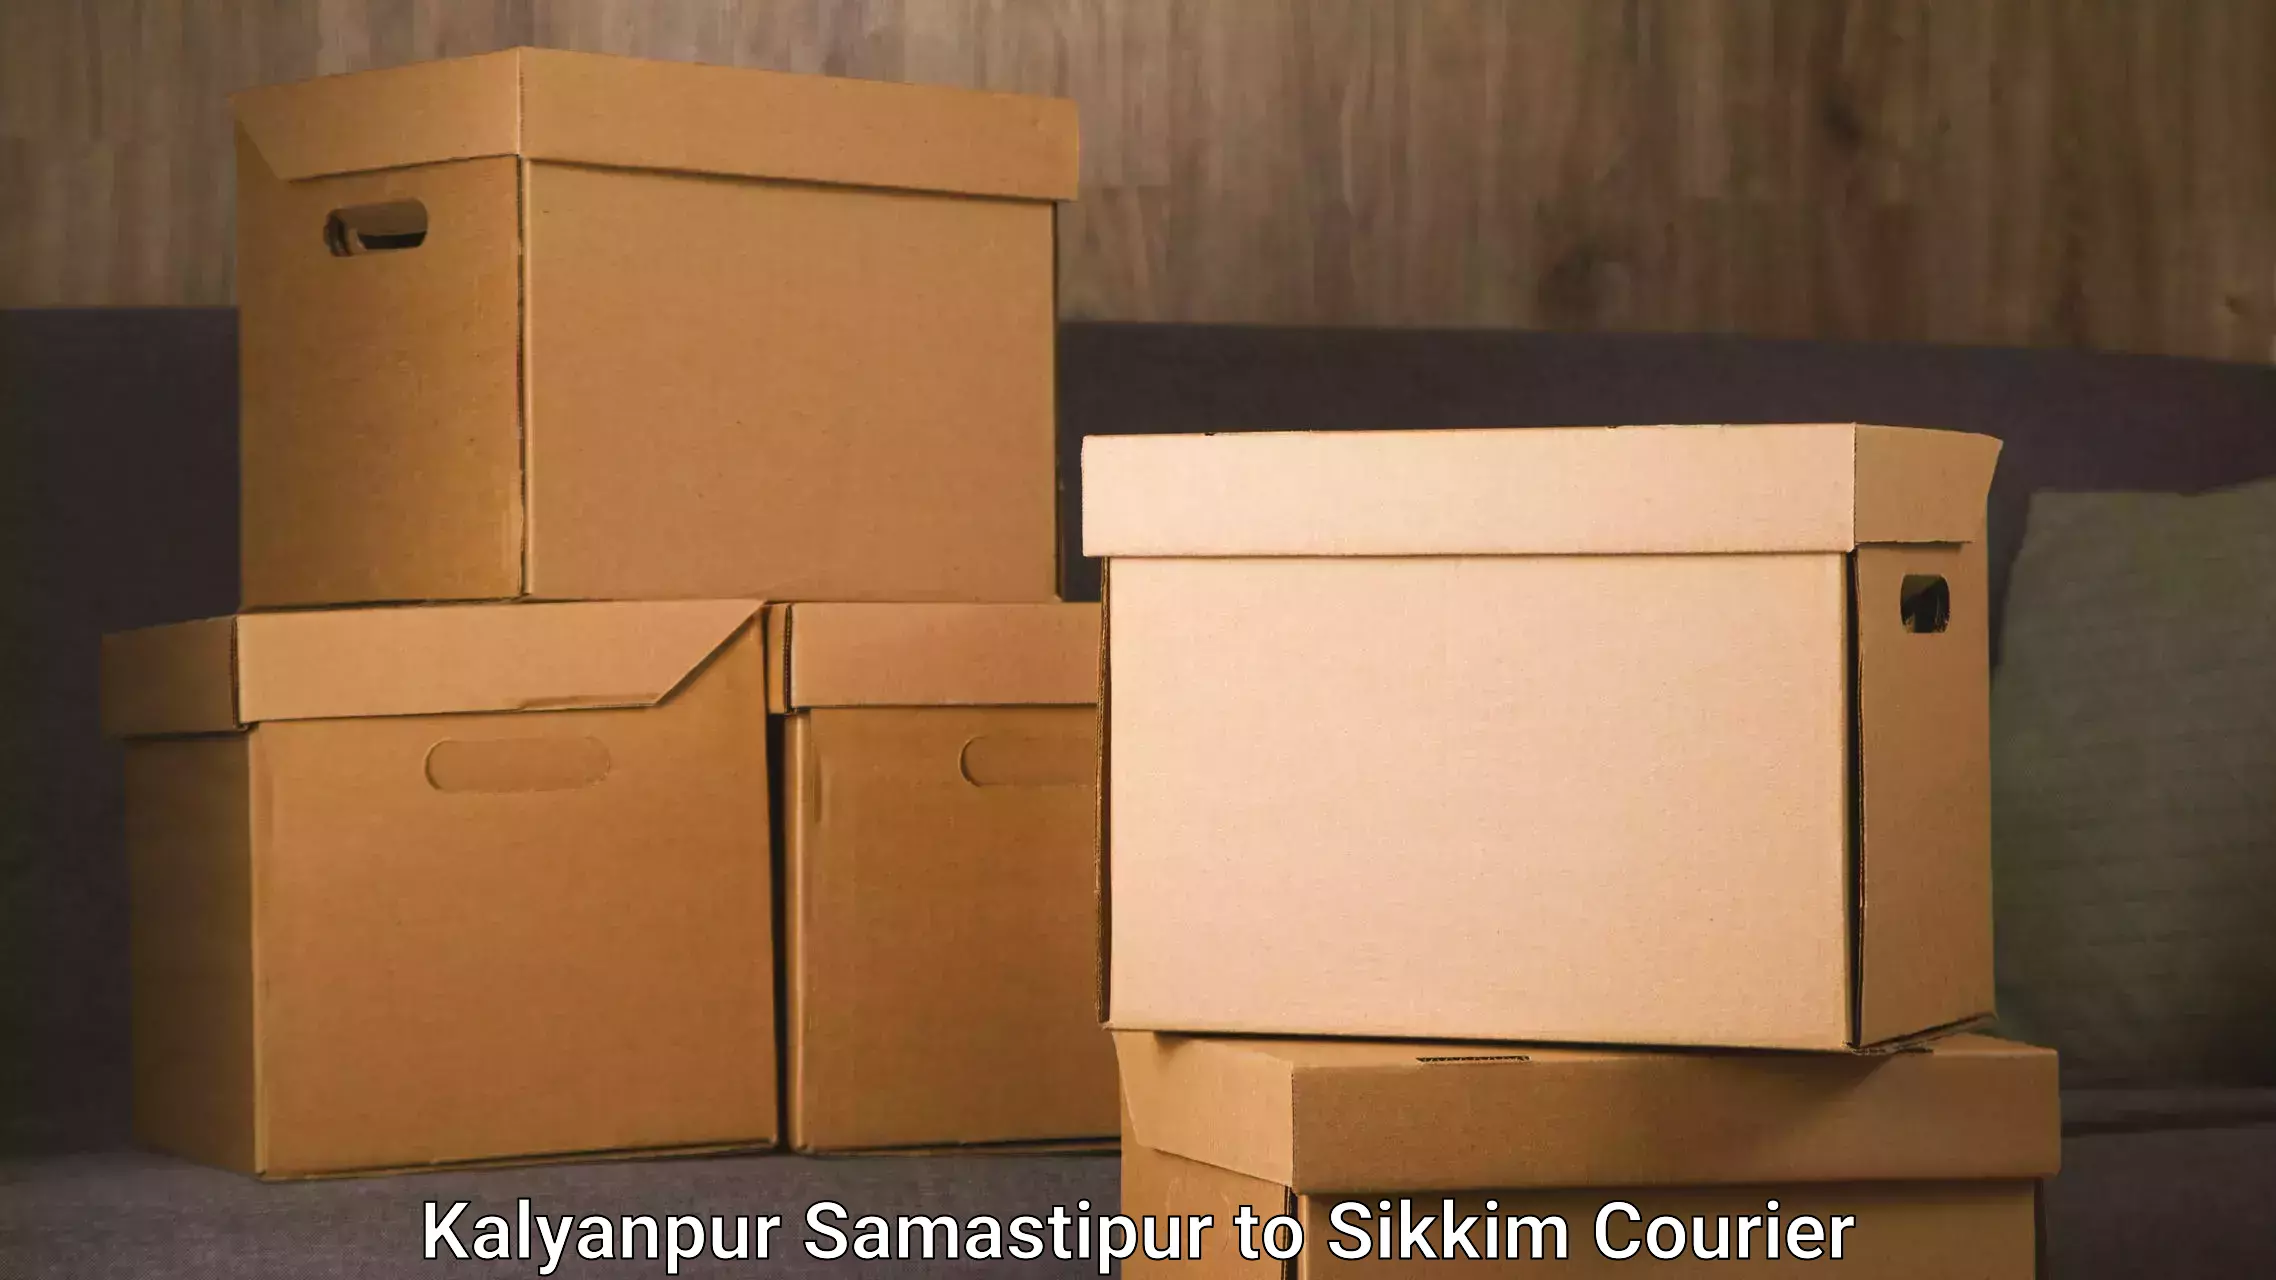 Furniture transport specialists Kalyanpur Samastipur to Pelling